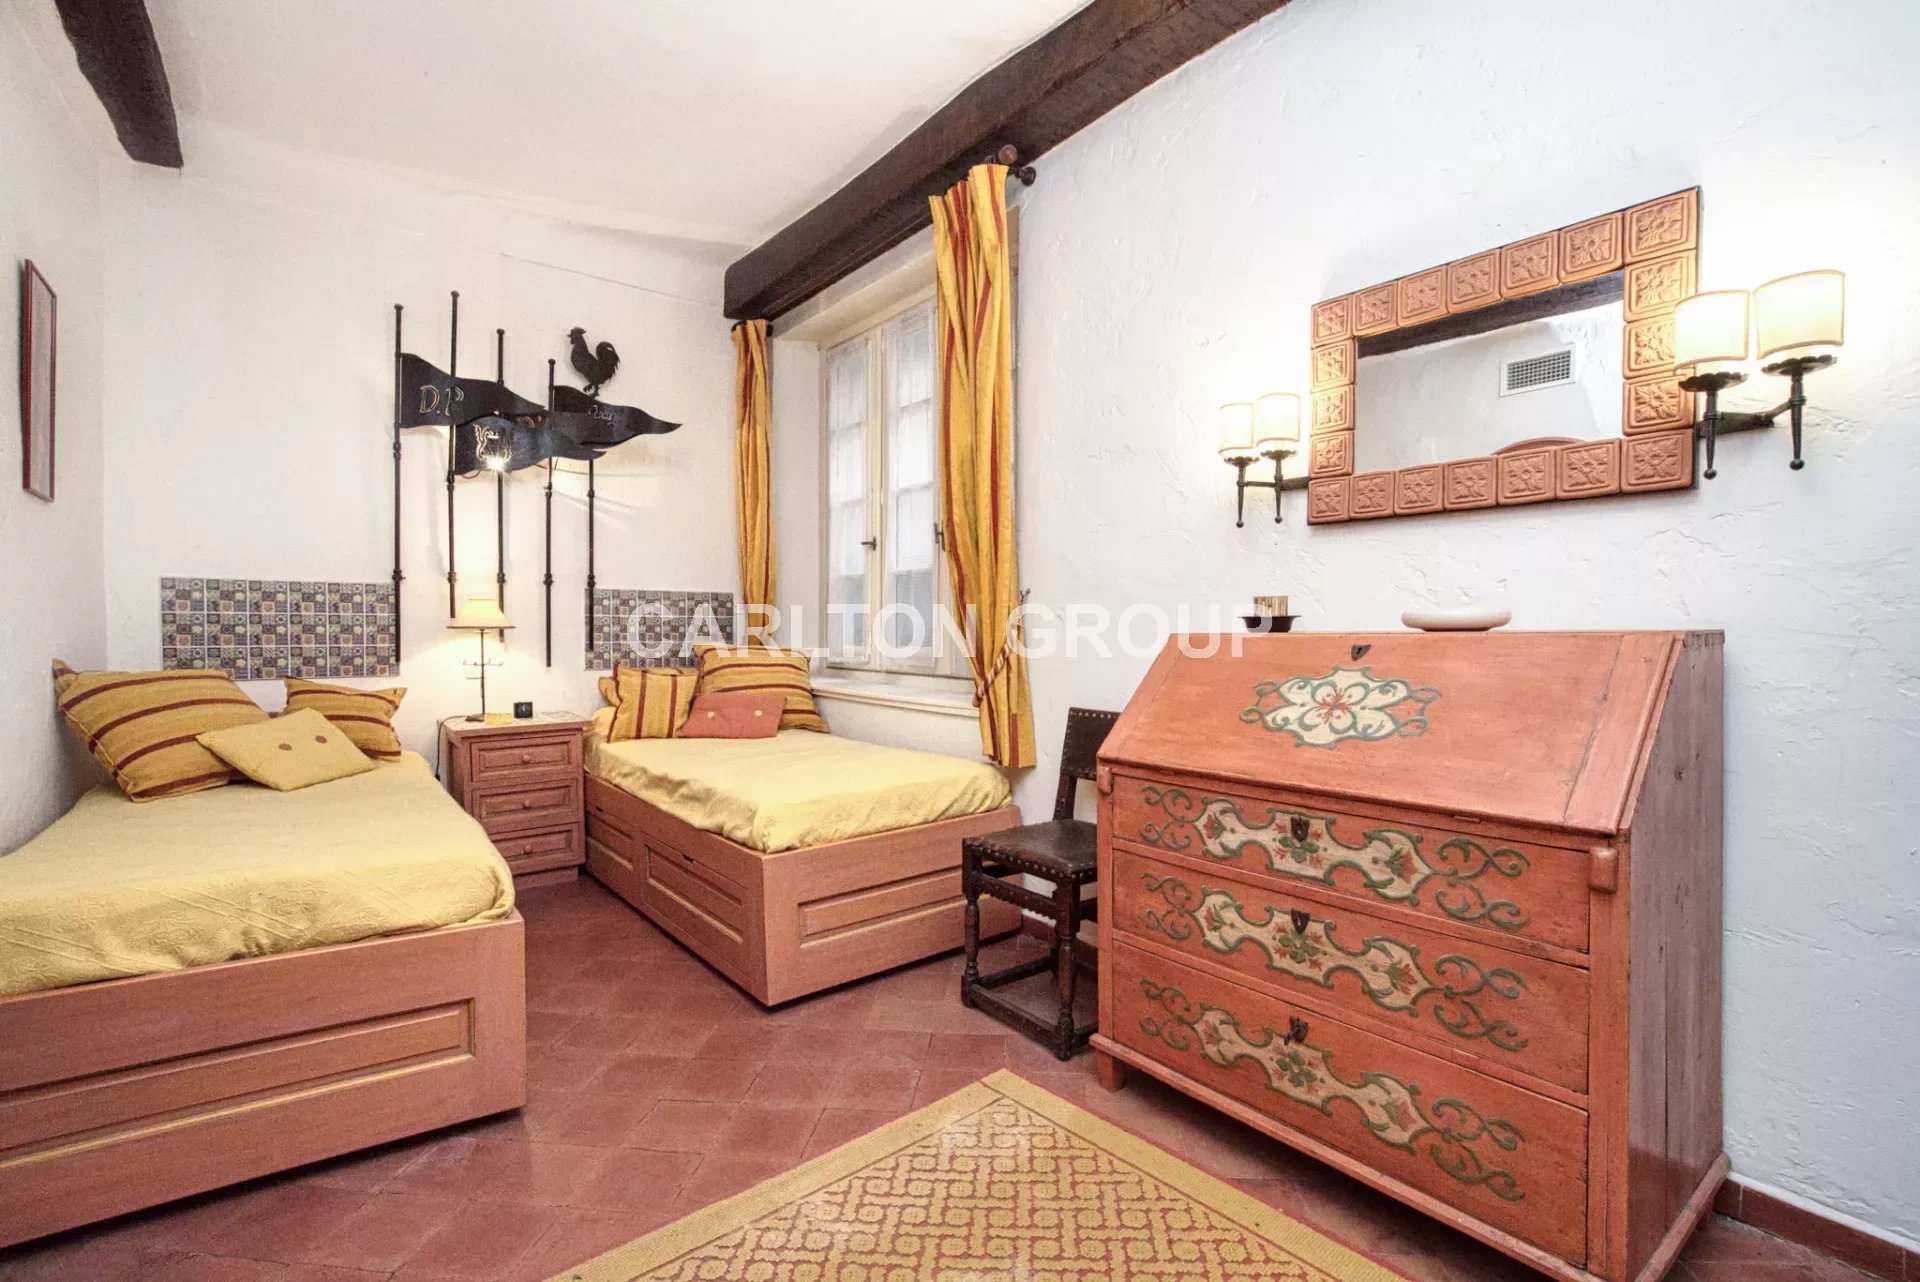 A Spacious 3-Room Apartment In The Heart Of Saint Tropez